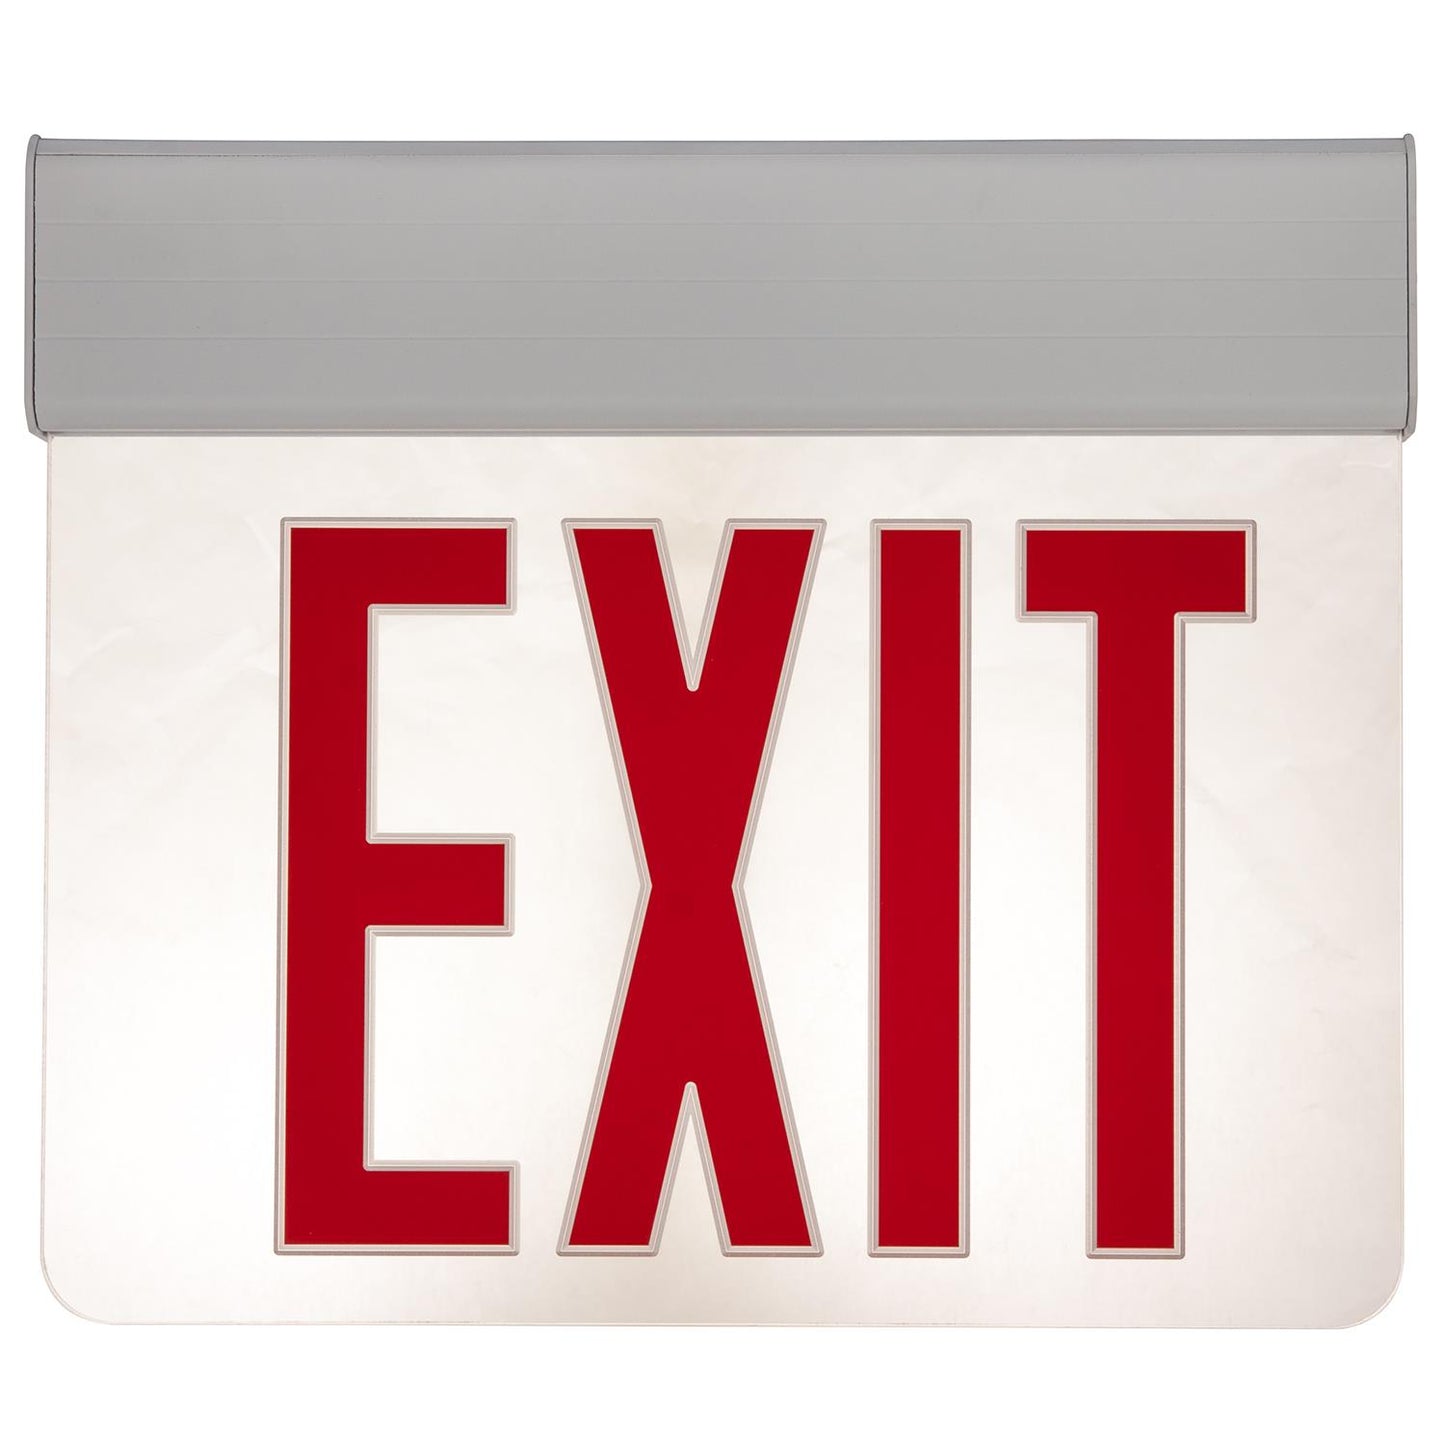 Sunlite Surface Mount Edge-Lit Exit Light, White Housing, Single Faced Clear Plate, NYC Approved, Universal Mounting Plate Included